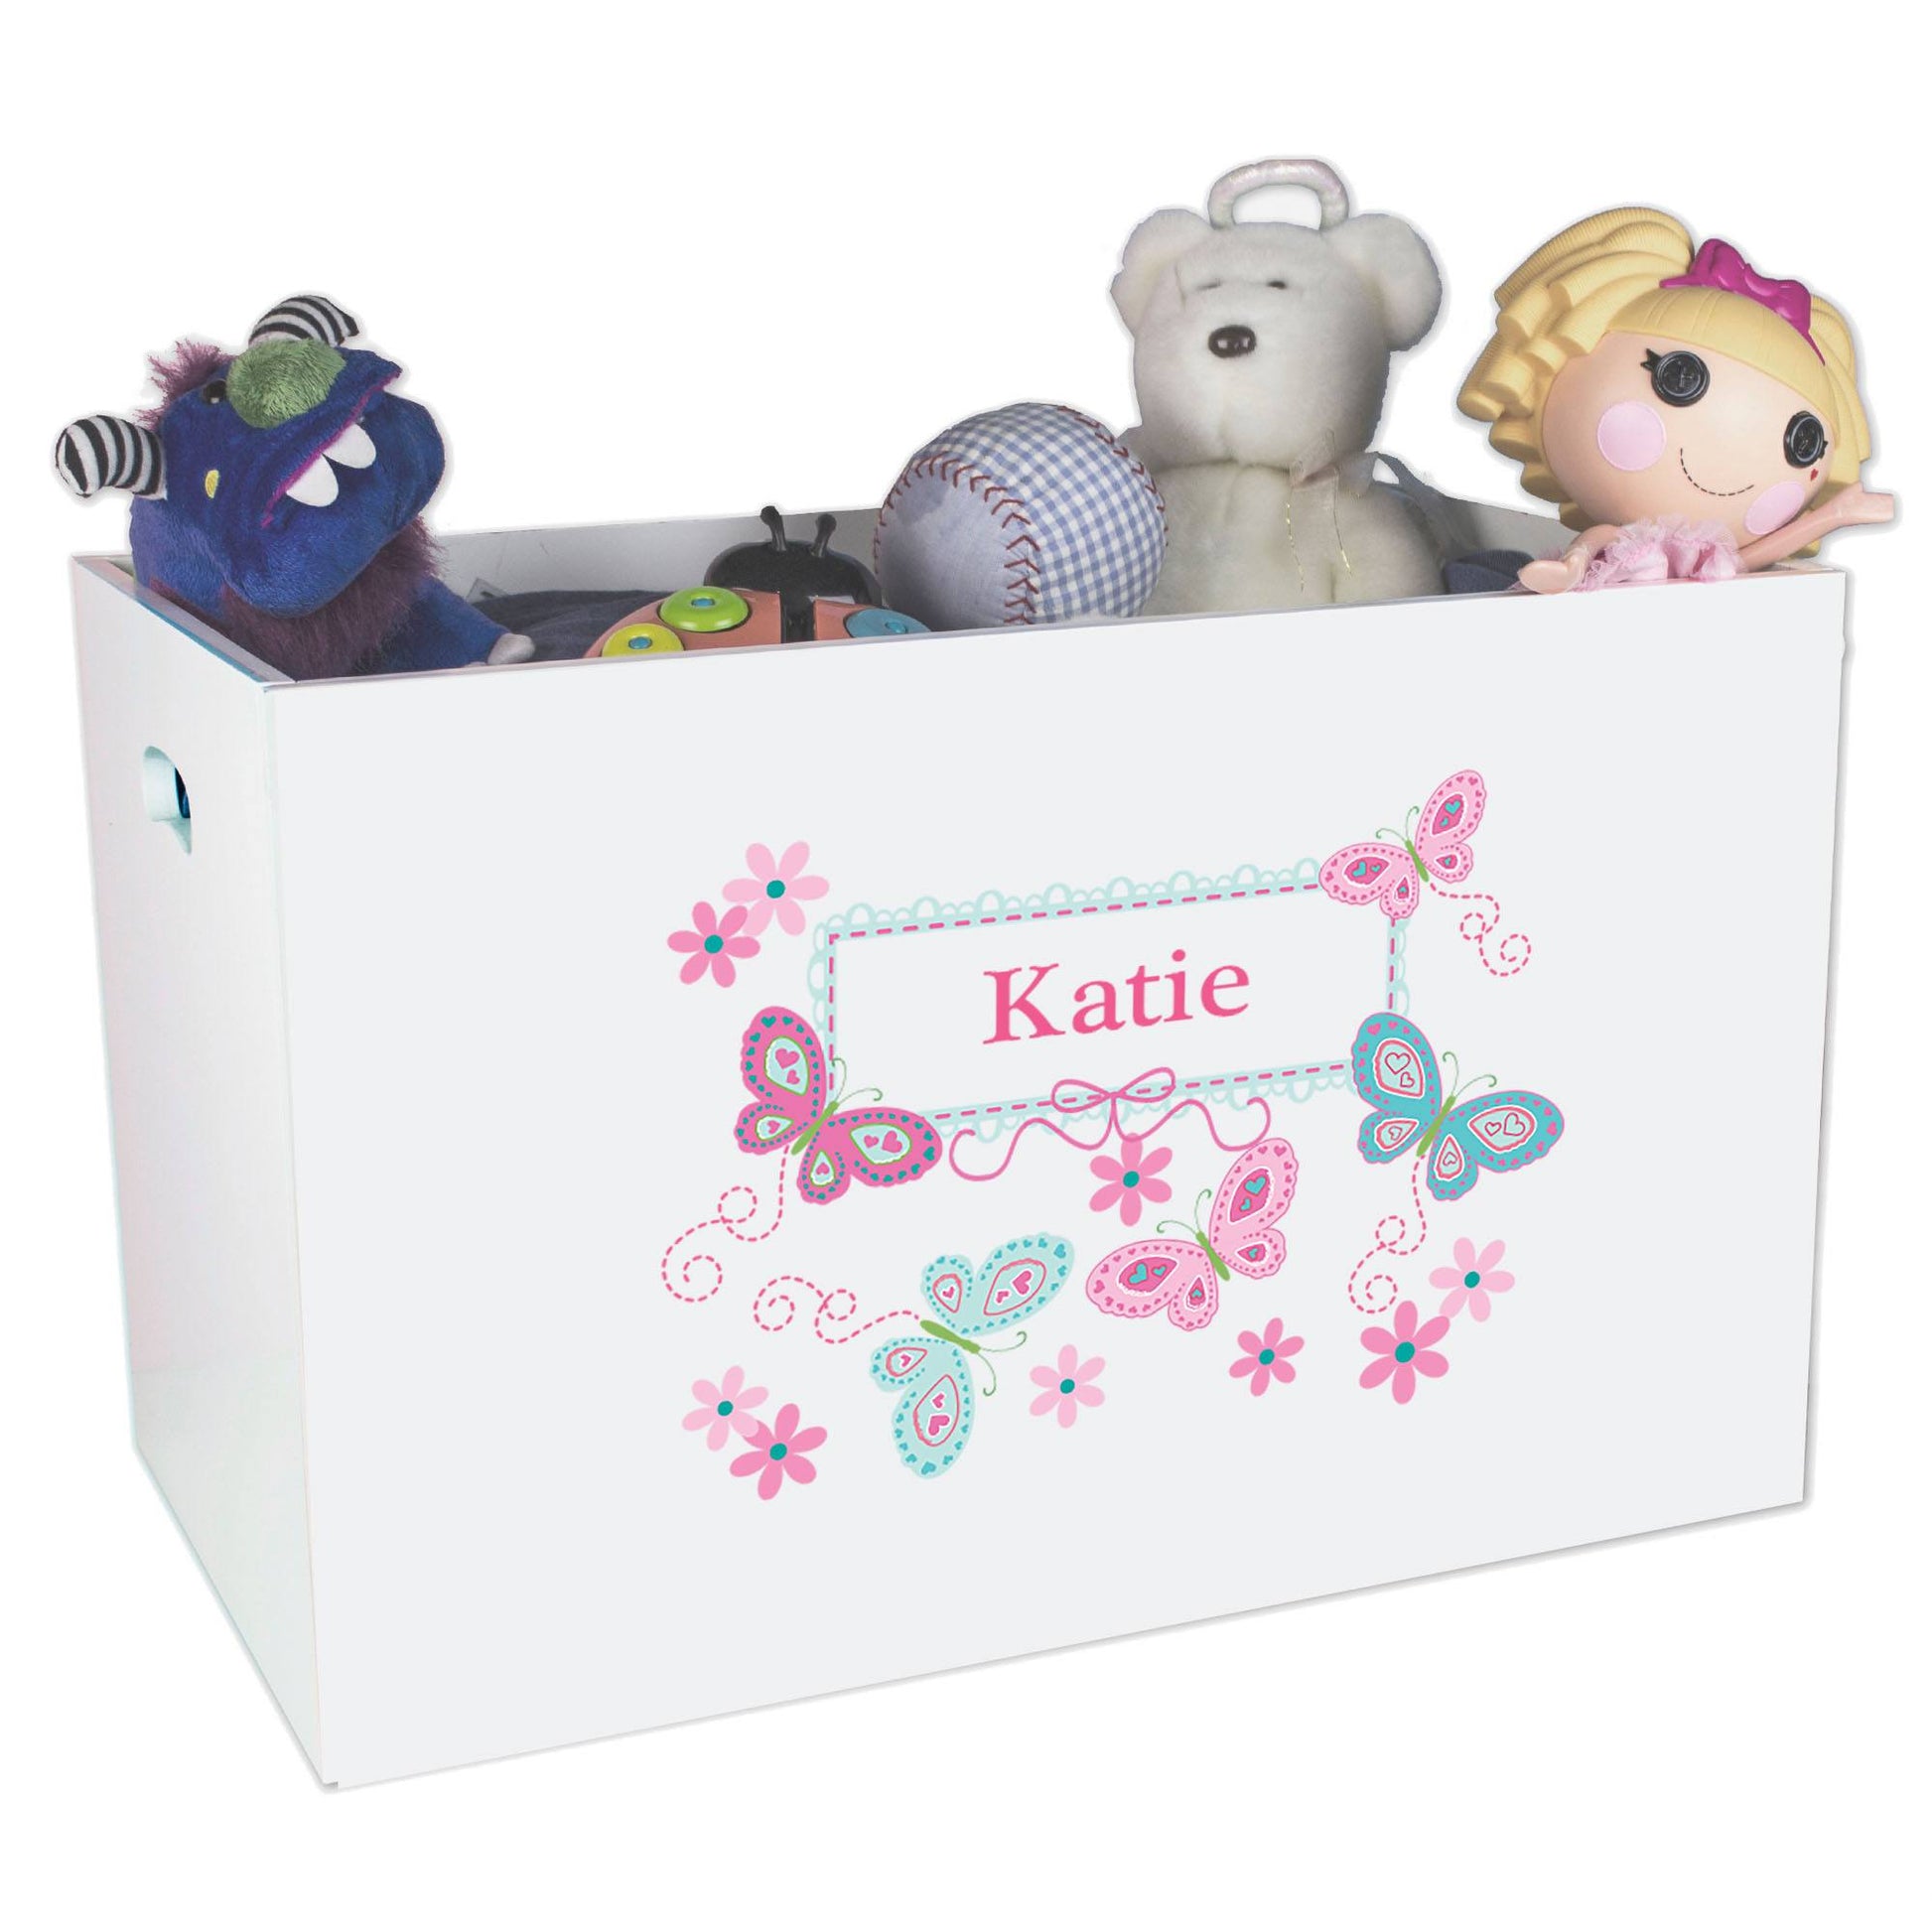 Open White Toy Box Bench with Butterflies Aqua Pink design